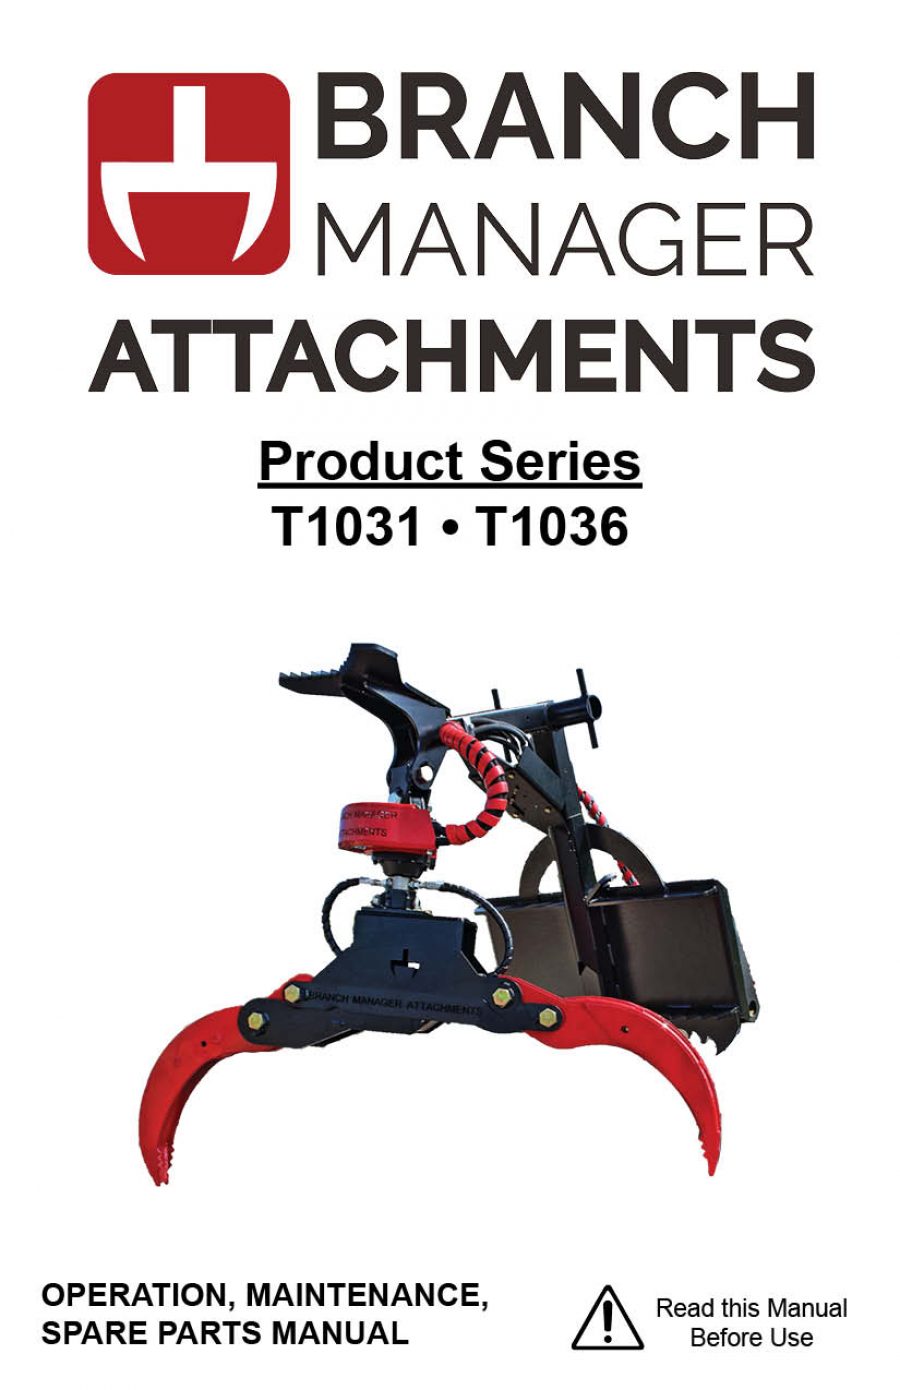 Product Manual_T1031_T1036_Branch Manager Attachments_Thumbnail